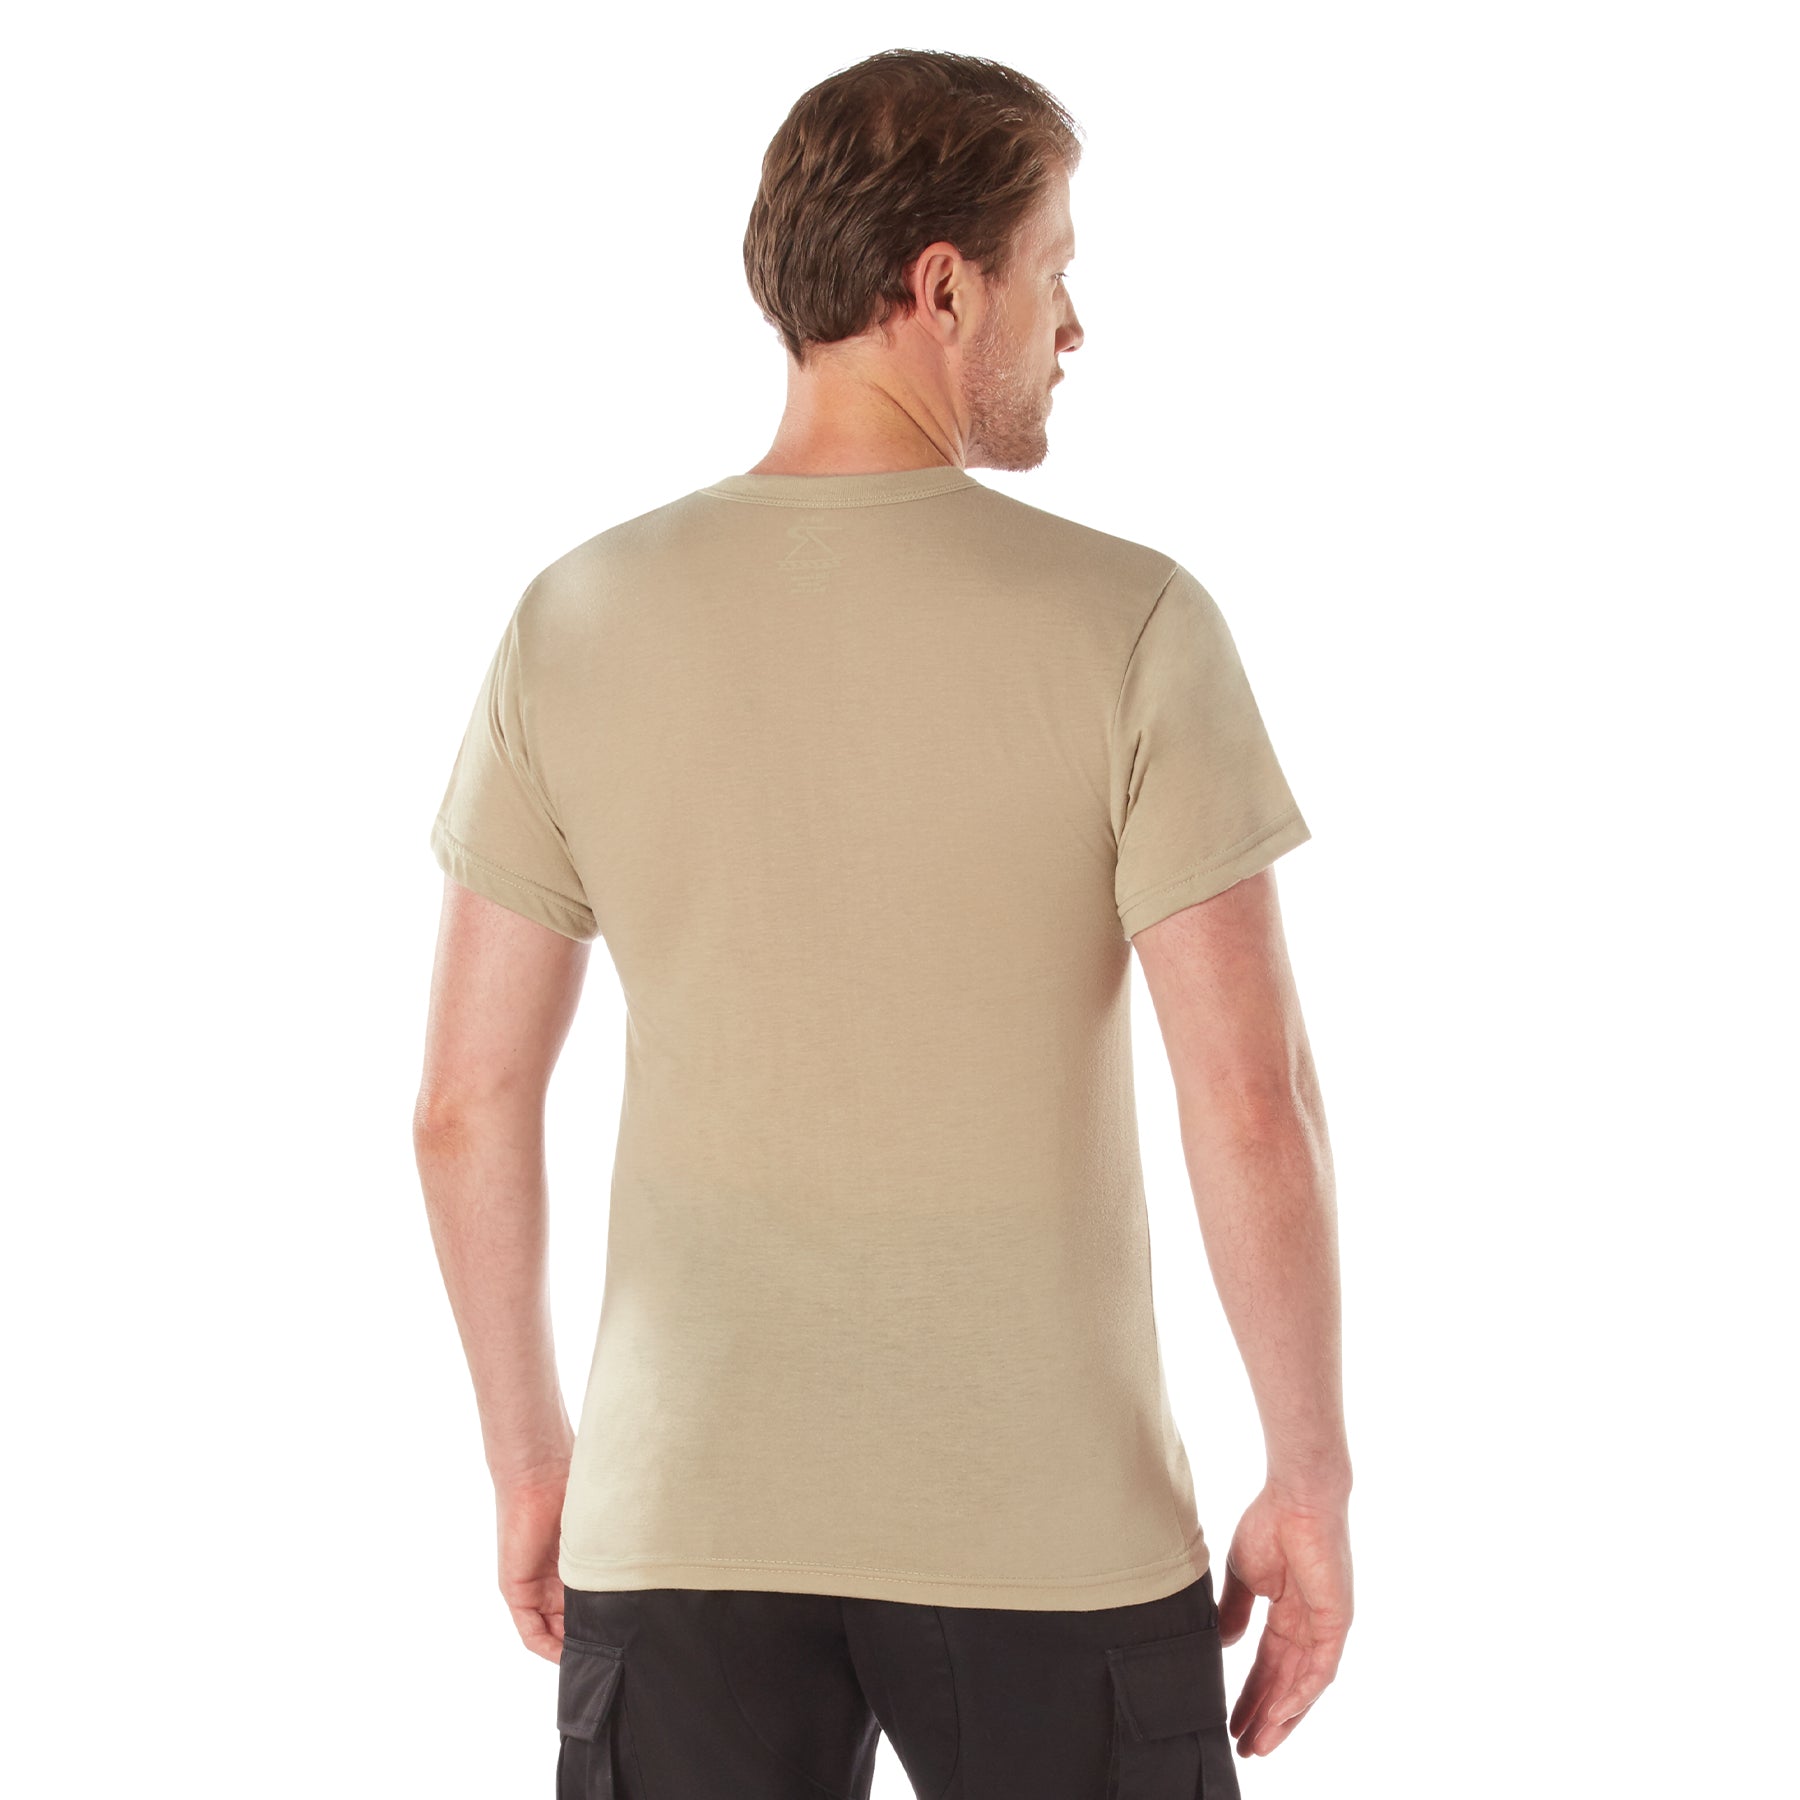 [AR 670-1] Poly Moisture Wicking T-Shirts